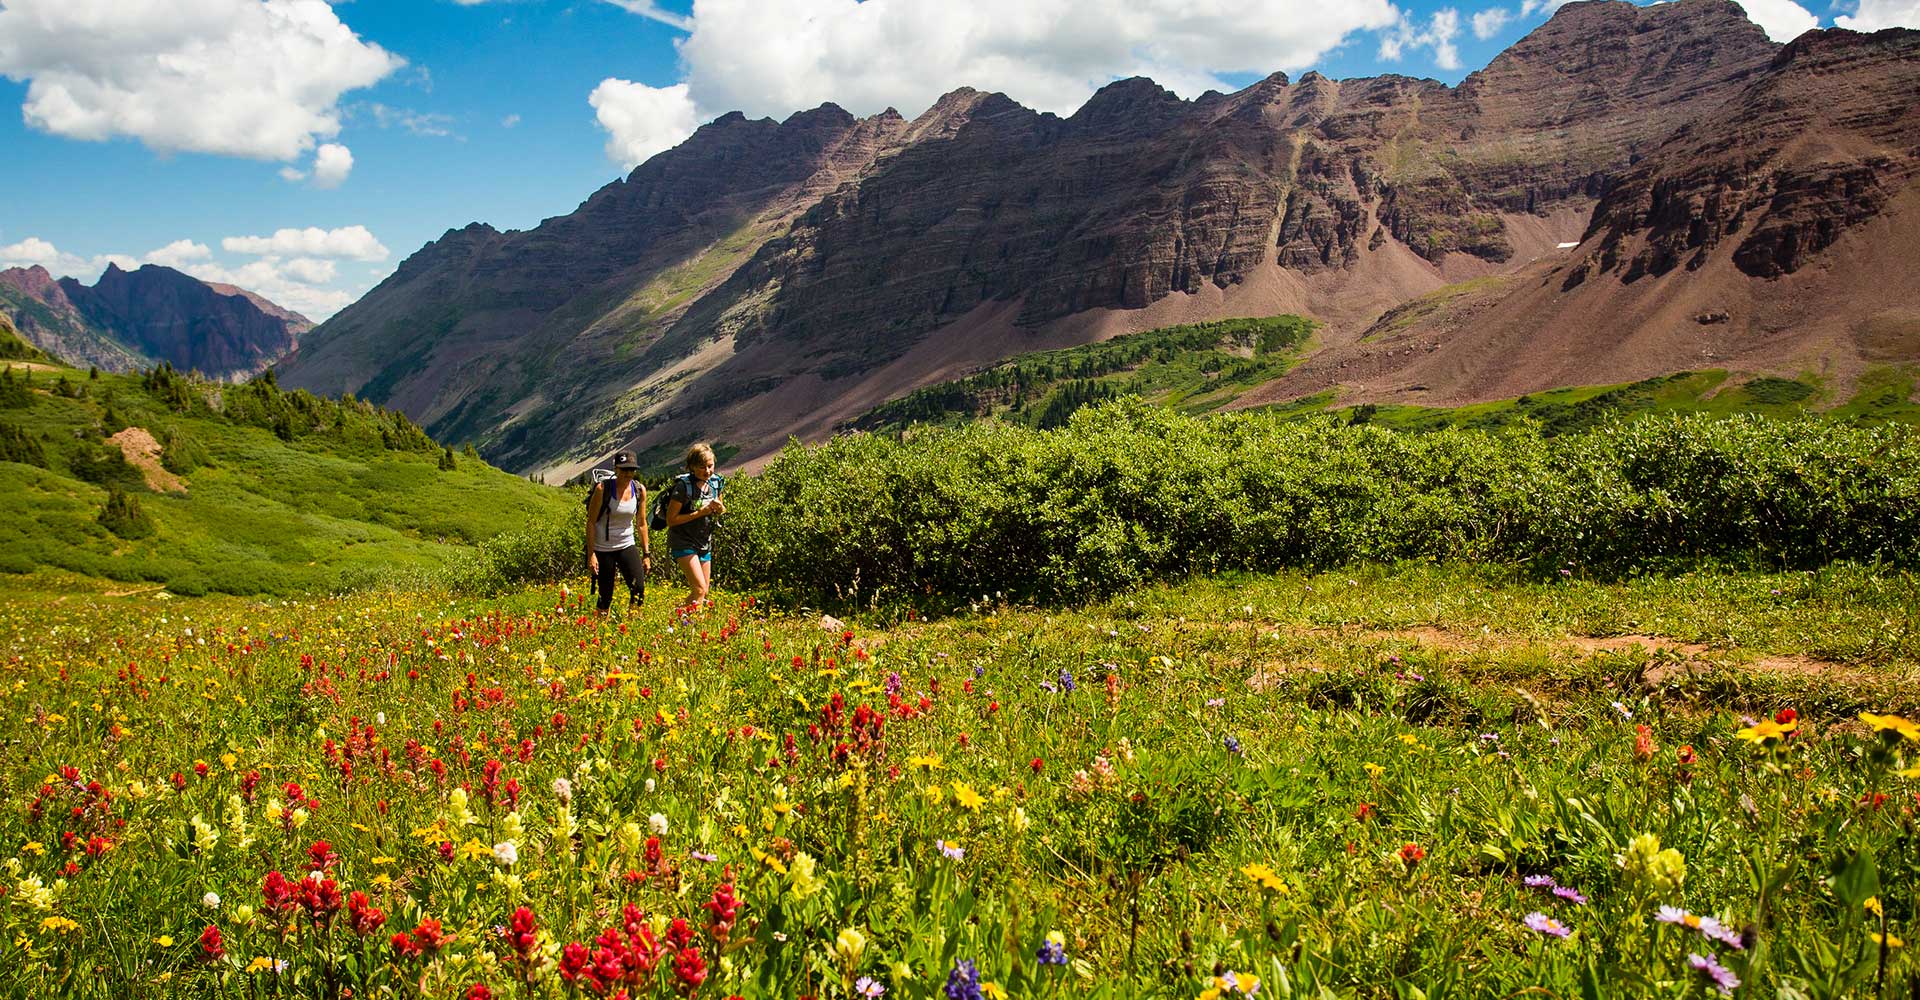 Wildflowers galore en route from Aspen to Crested Butte